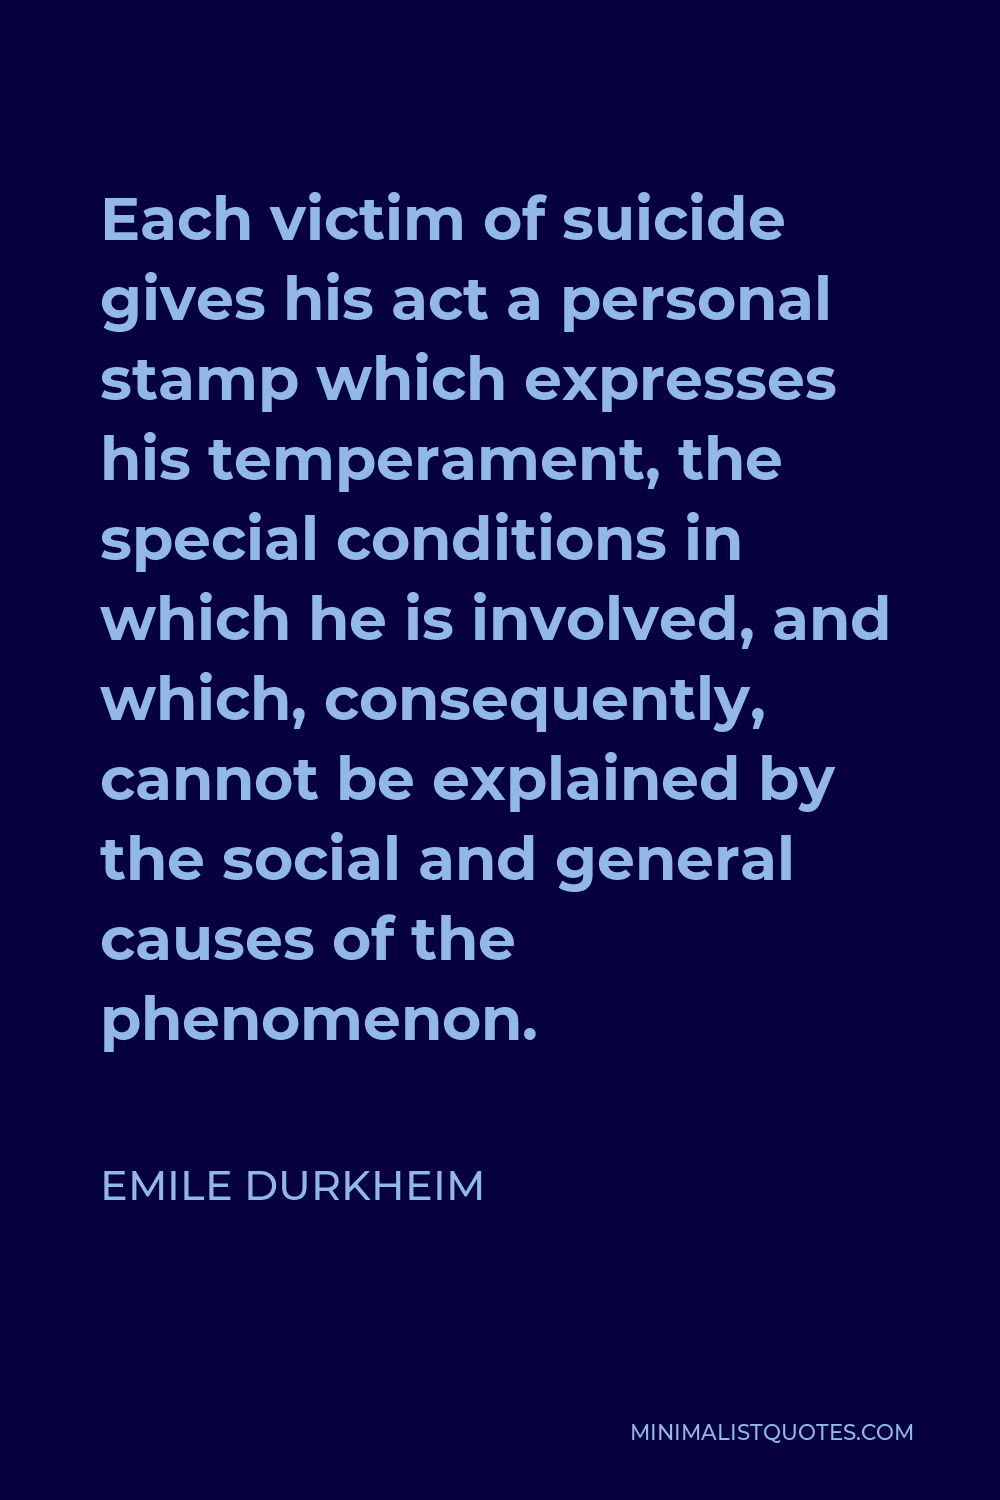 Emile Durkheim Quote - Each victim of suicide gives his act a personal stamp which expresses his temperament, the special conditions in which he is involved, and which, consequently, cannot be explained by the social and general causes of the phenomenon.